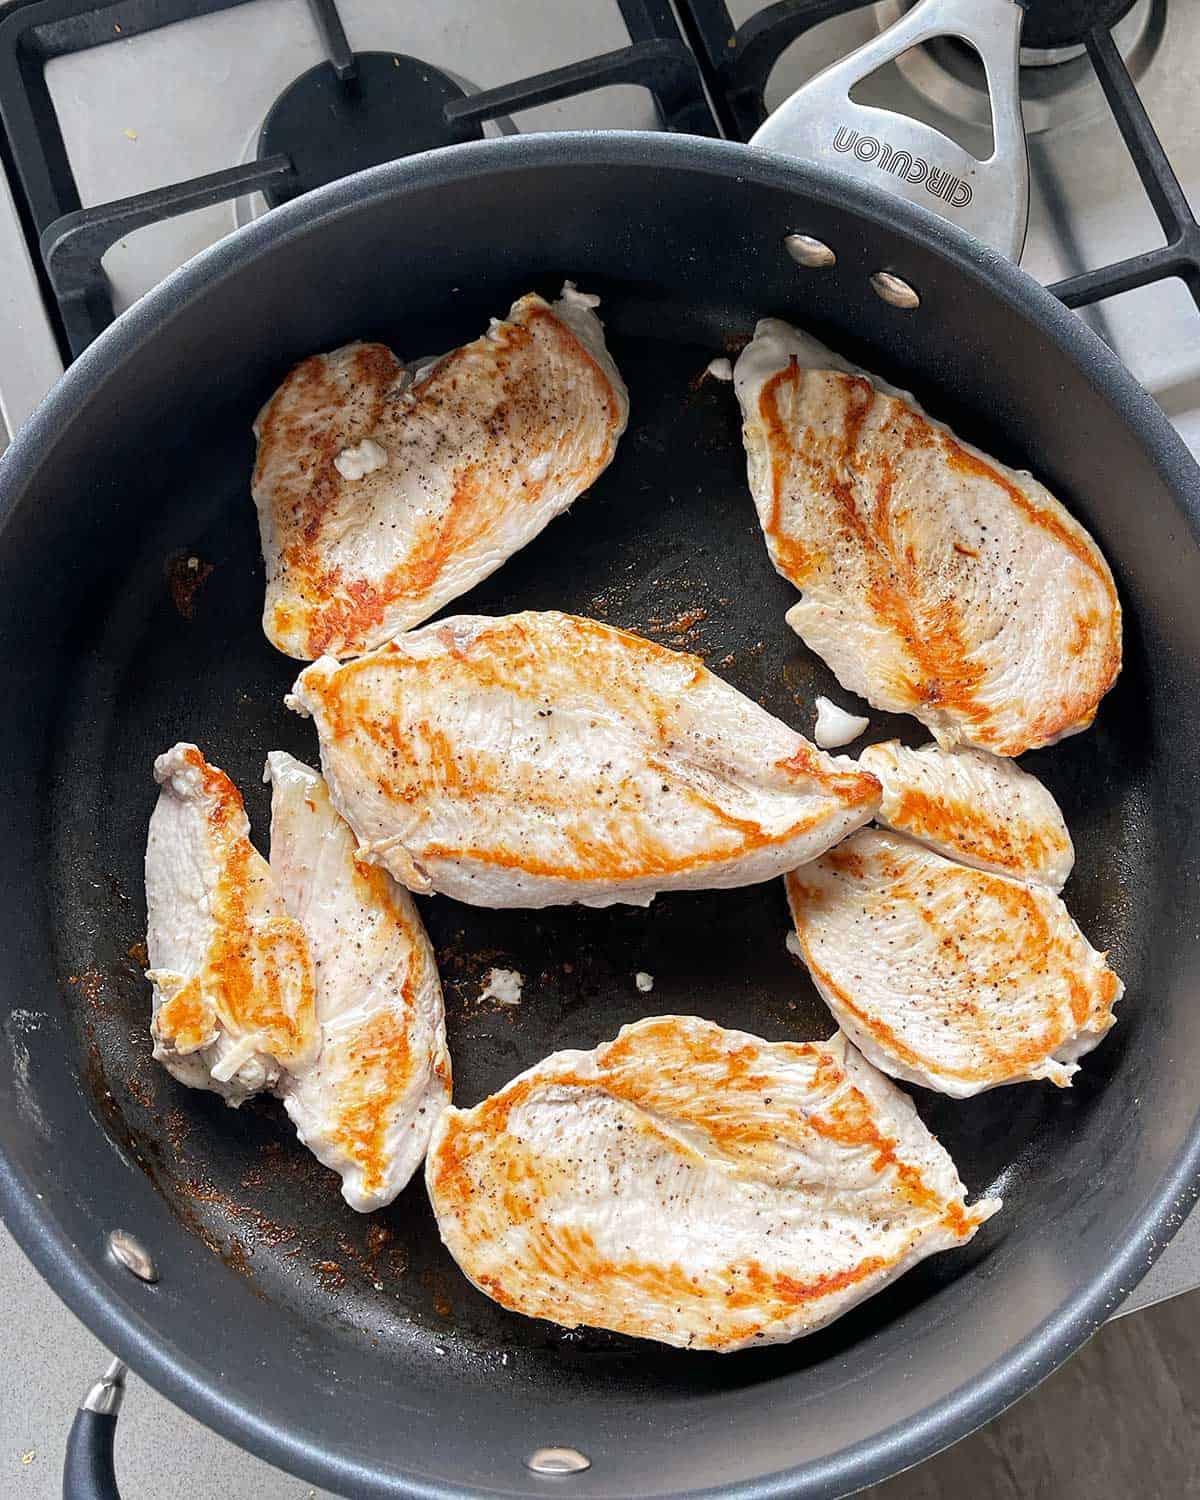 Grilled chicken breast cooking in a non stick frying pan.